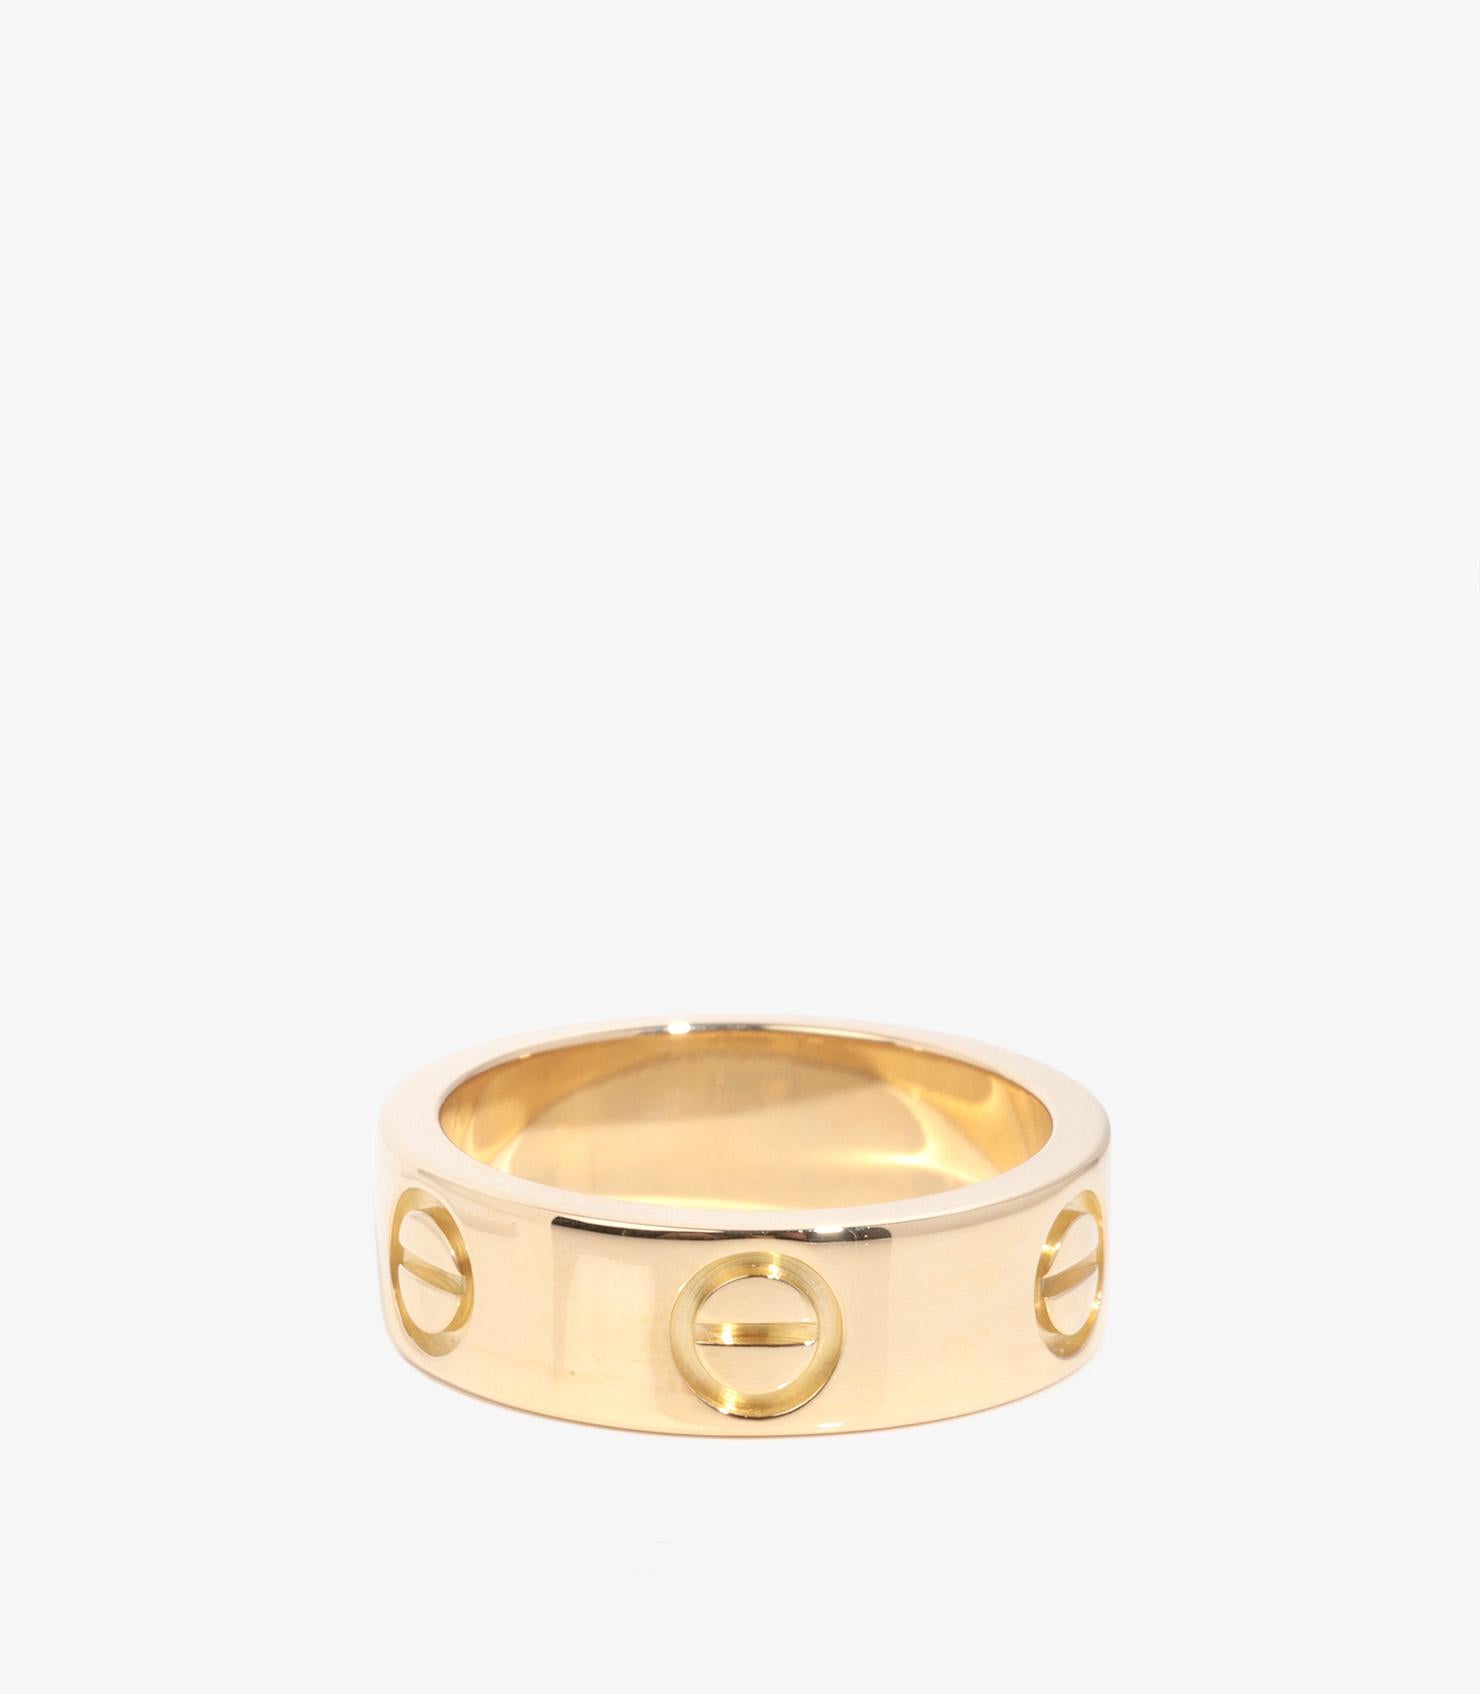 Cartier 18ct Yellow Gold Love Band Ring

Brand- Cartier
Model- Love Band Ring
Product Type- Ring
Serial Number- F8****
Age- Circa 1998
Accompanied By- Cartier Certificate
Material(s)- 18ct Yellow Gold
UK Ring Size- I 1/2
EU Ring Size- 48
US Ring